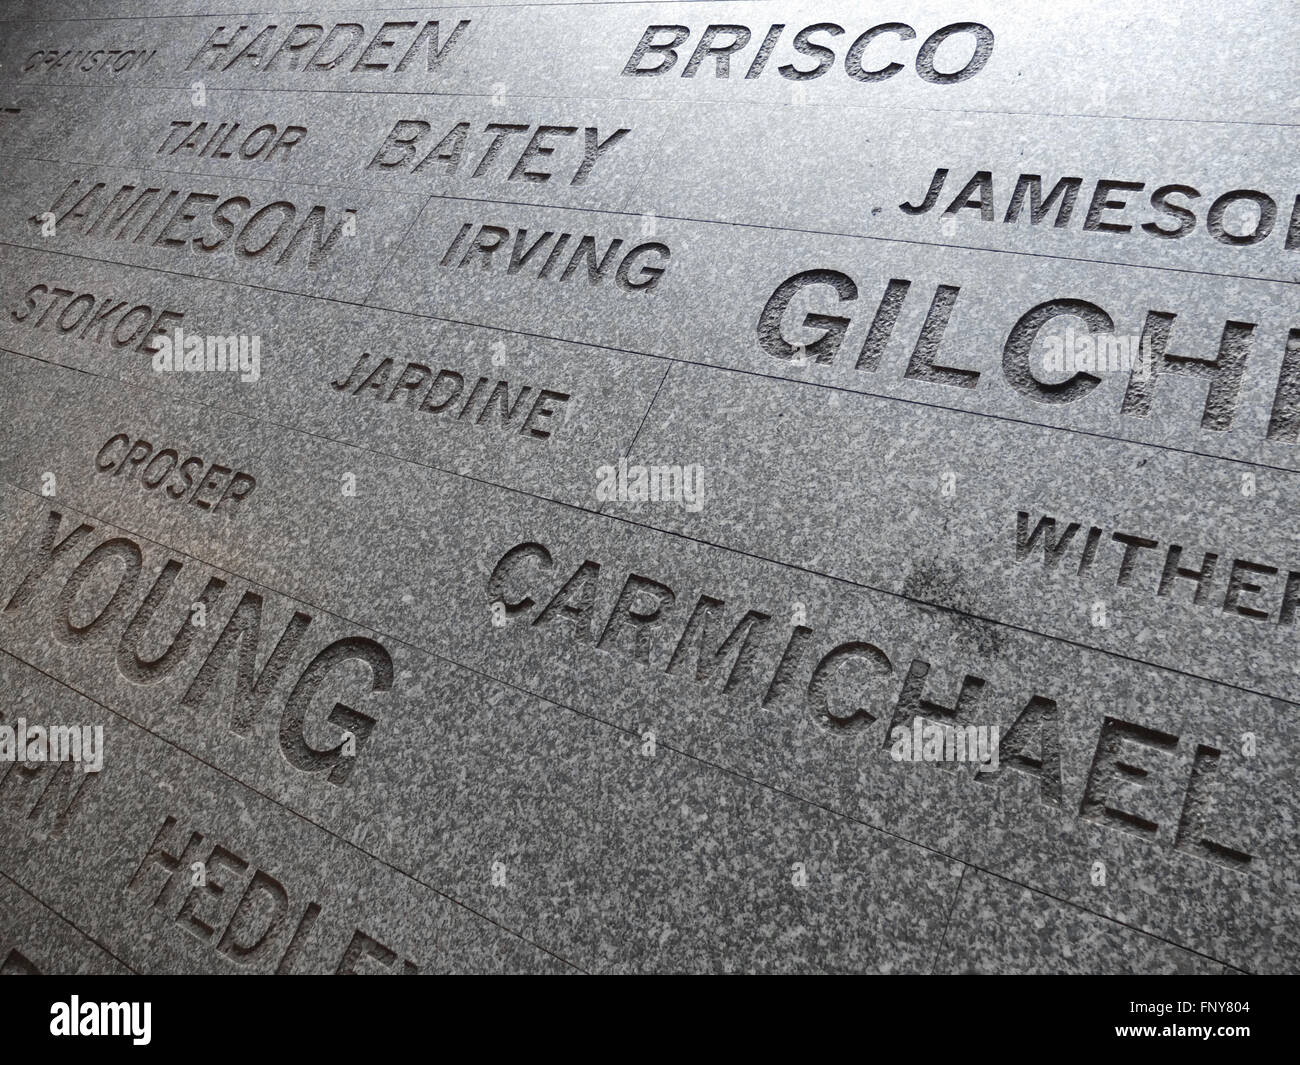 Reiver surnames on the pavement around the cursing stone in Carlisle, Cumbria Stock Photo